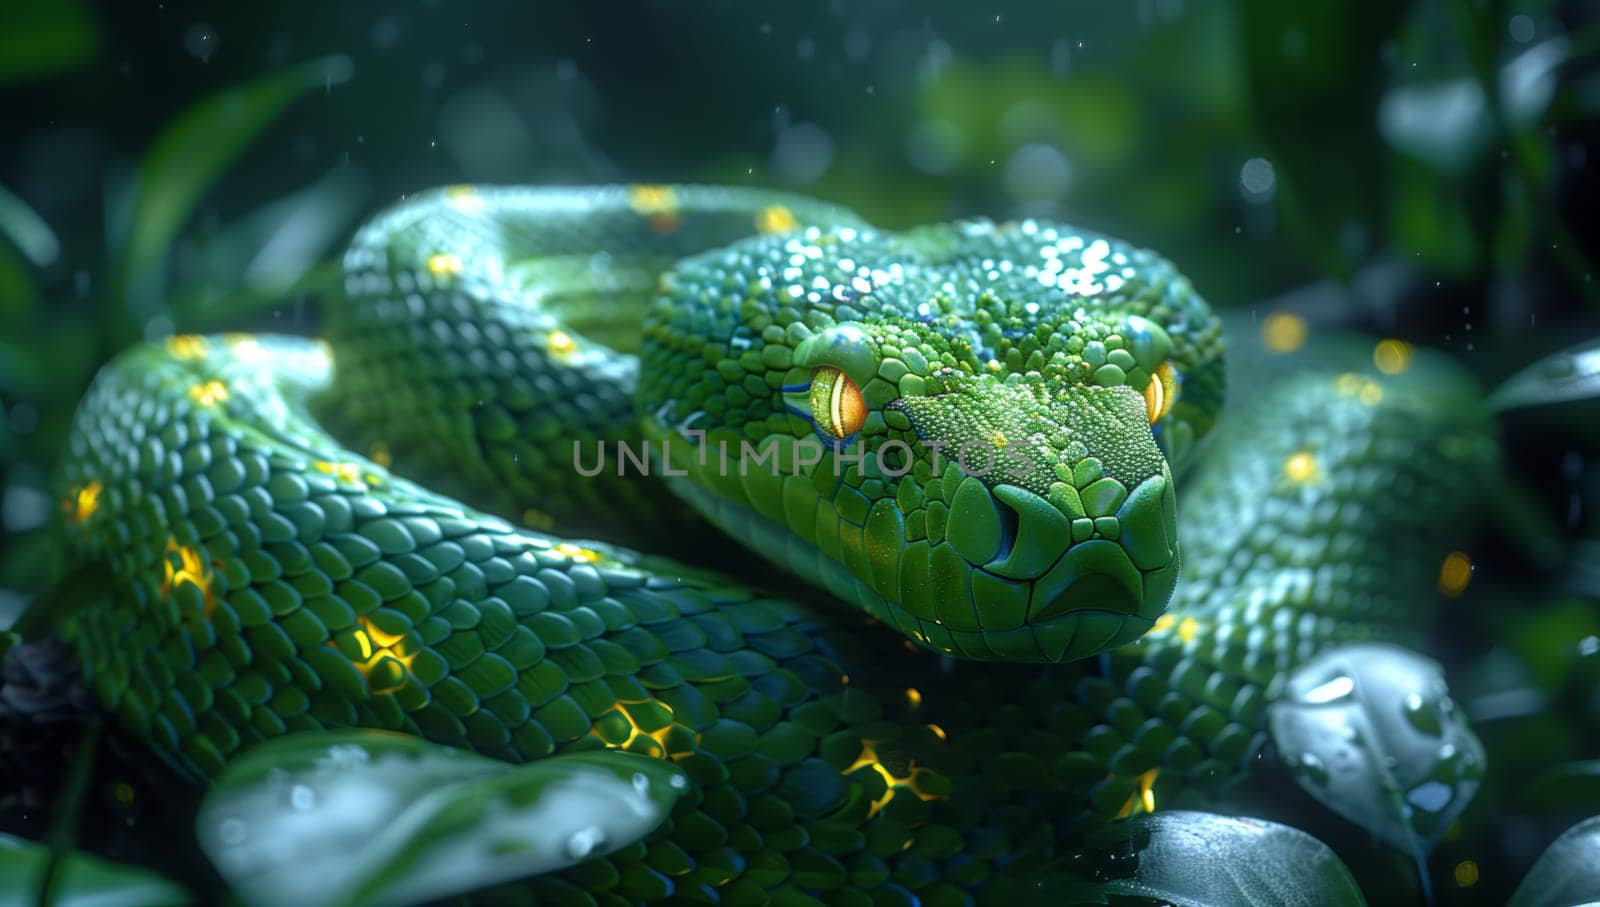 A Smooth Greensnake, a terrestrial animal, with electric blue scales and yellow eyes, is camouflaged among green leaves in this macro photography of wildlife